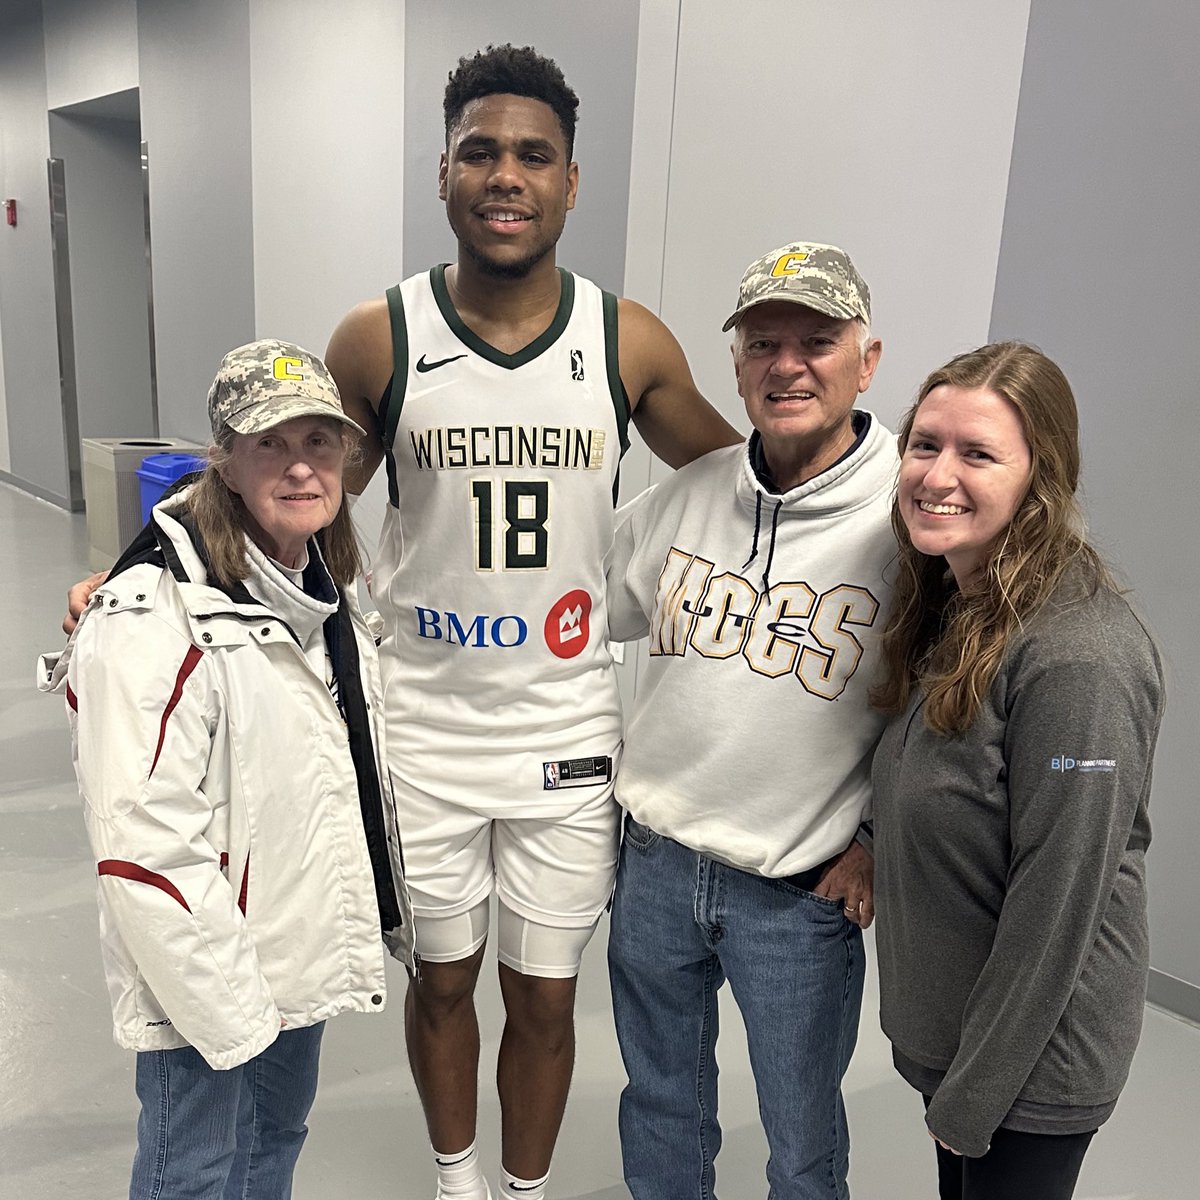 Thanks to @maliworld11 and @jakestephens0 for making my first NBA experiences this week great ones! So thankful for the impact these two had with @utcfca and have loved following their journey since their Mocs days…